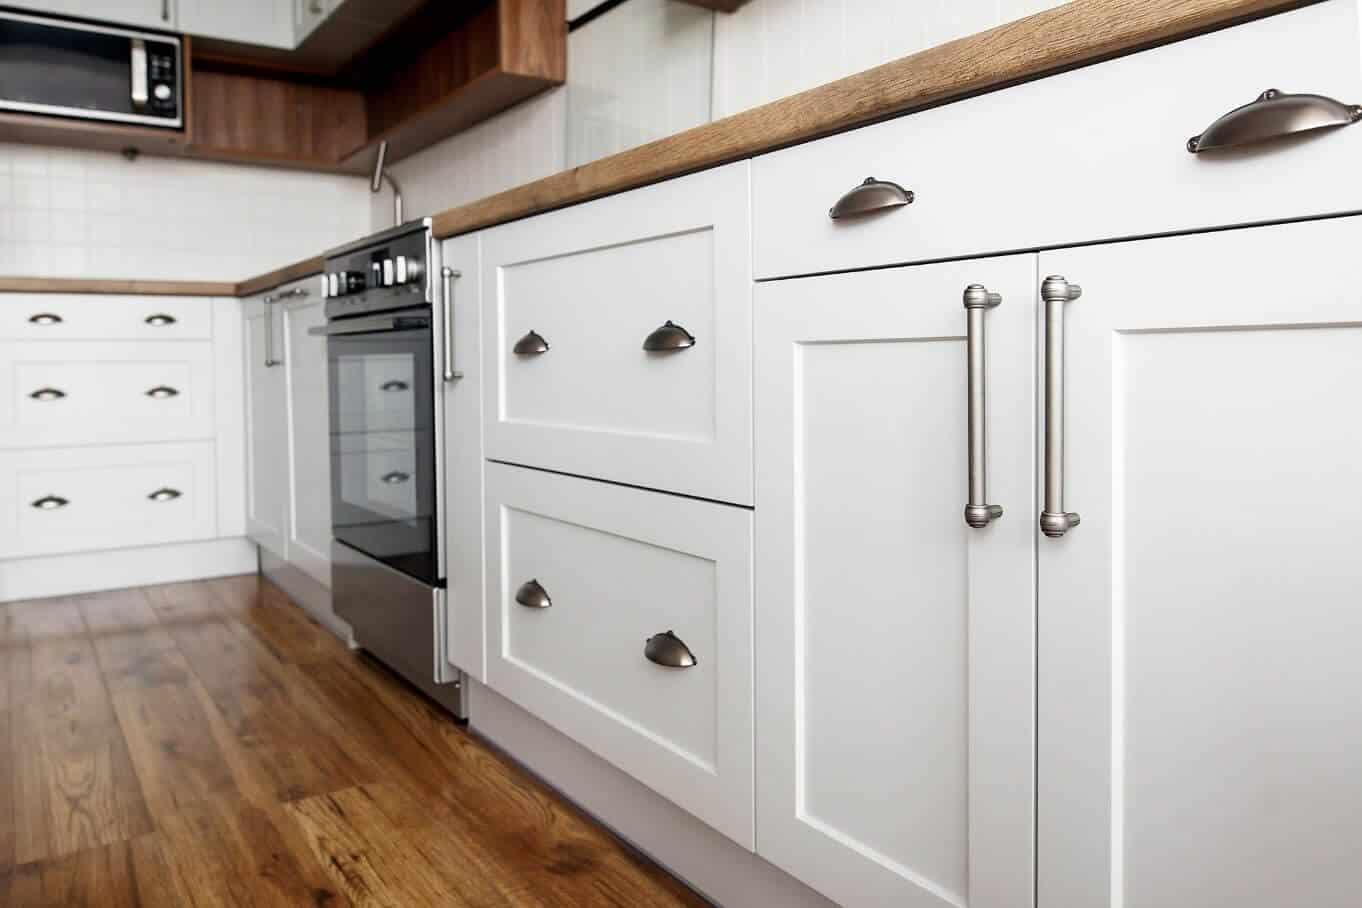 Questions To Ask Yourself Before Choosing Kitchen Cabinets